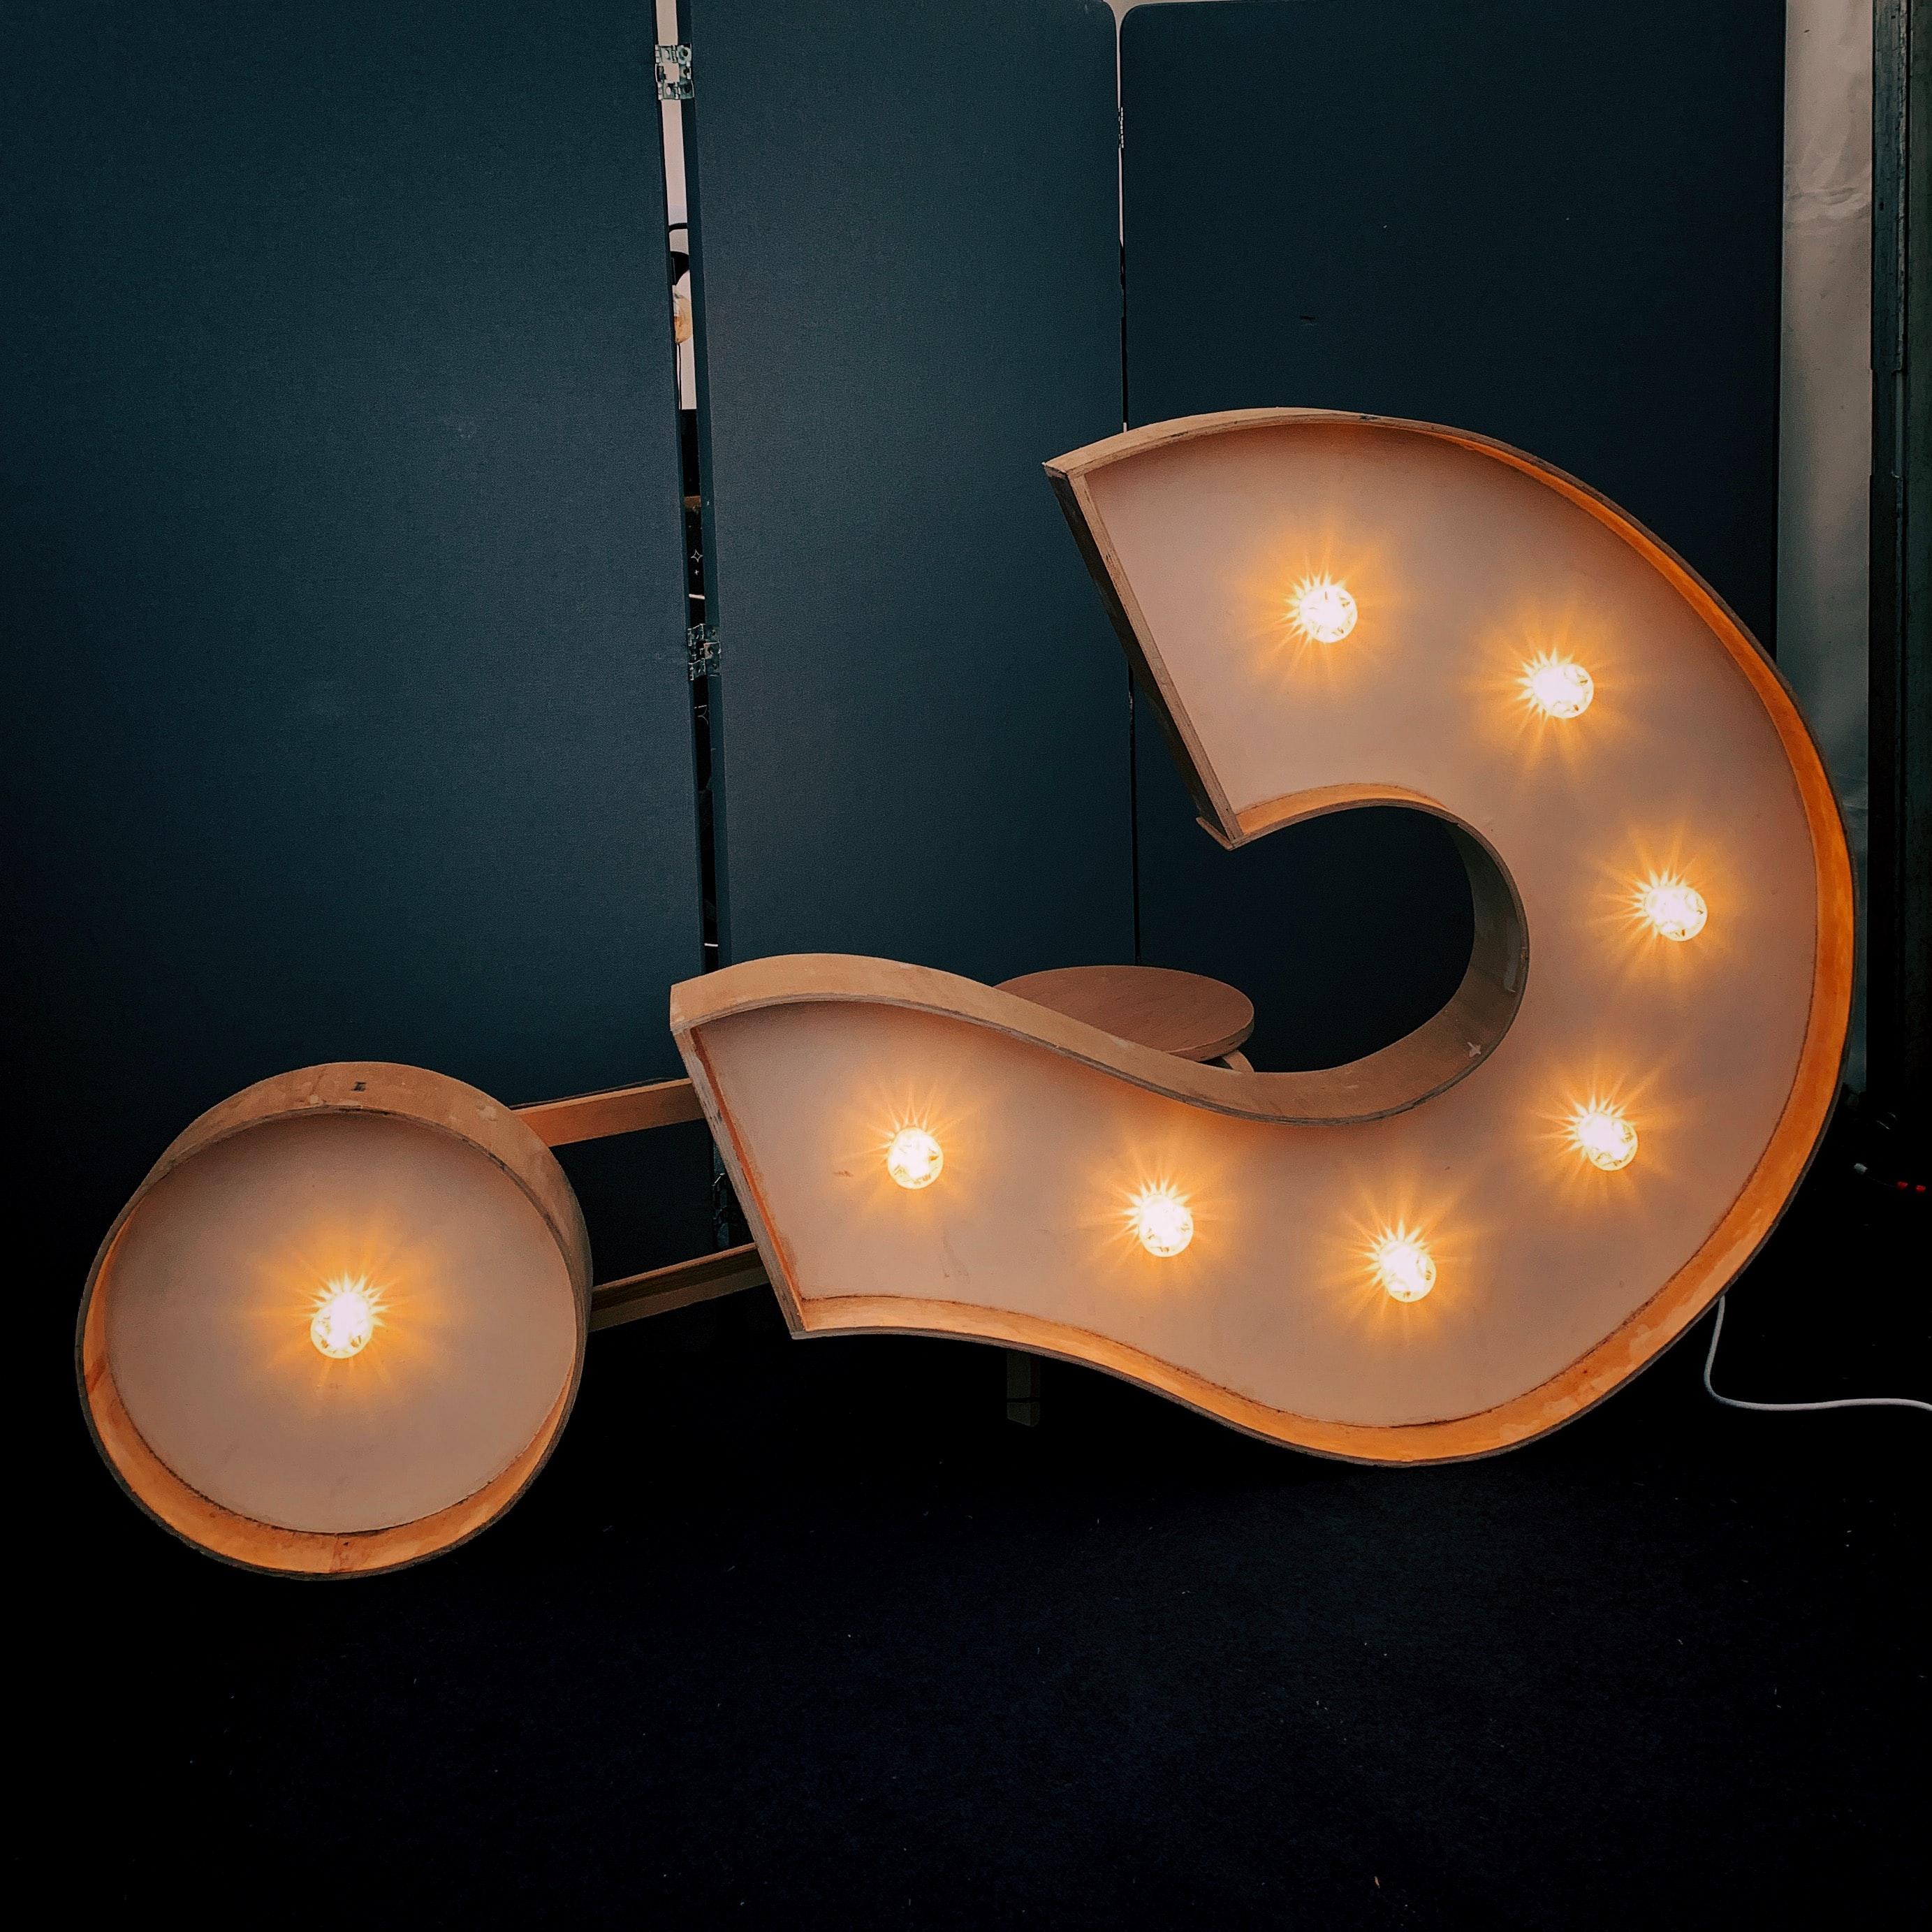 Large question mark sign with lights in the centre